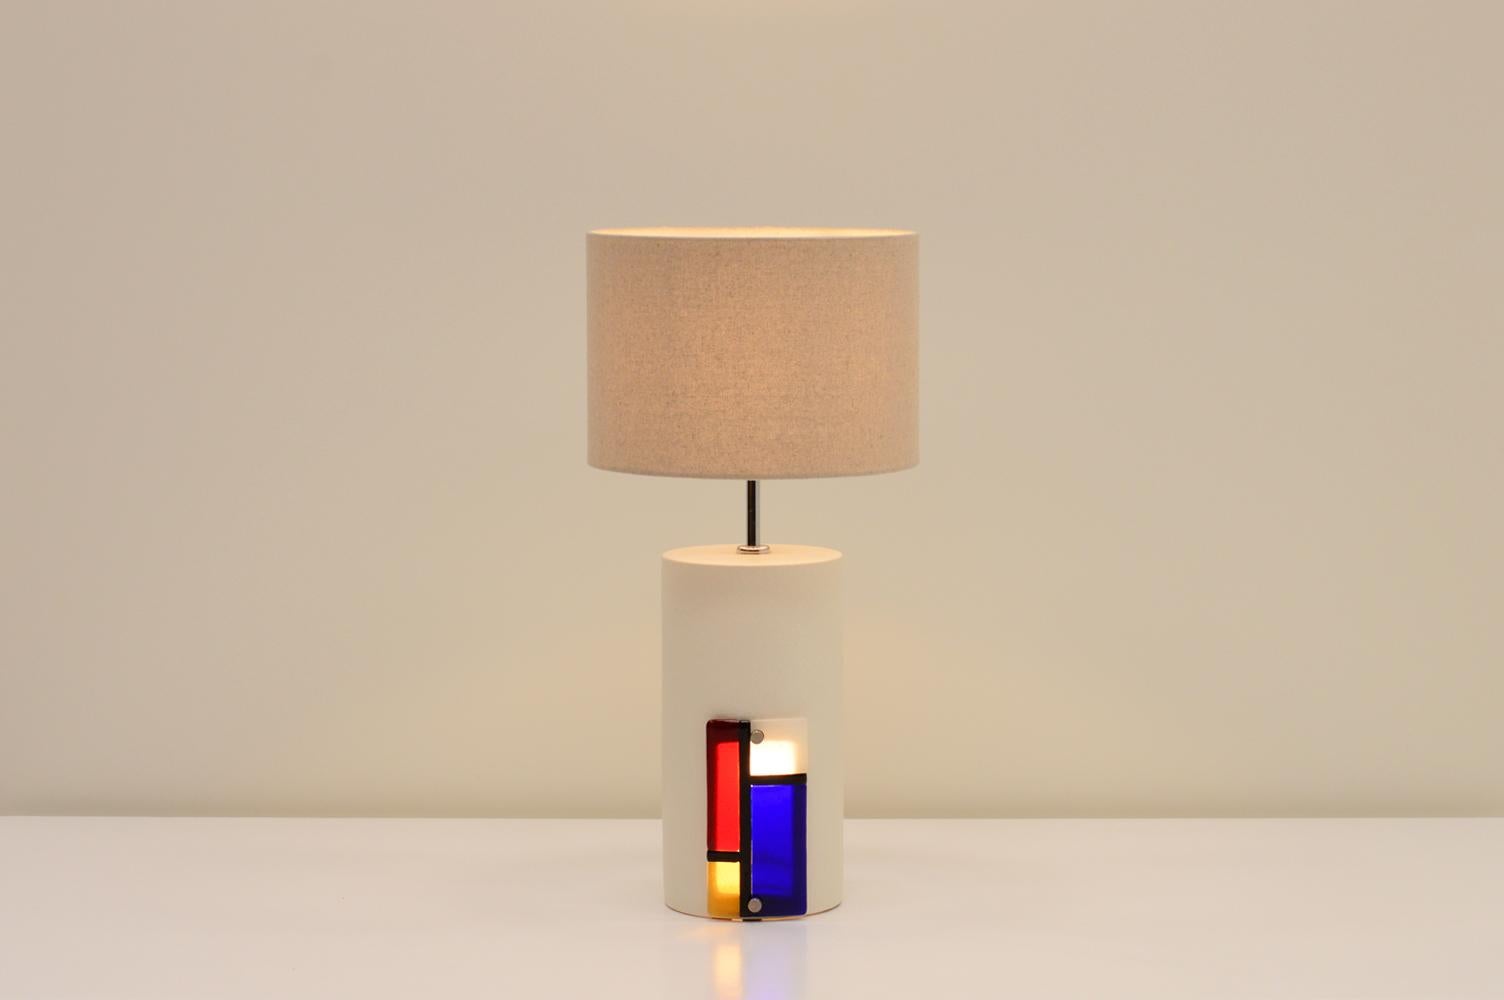 Large table lamp by Ceramics Bondia, Spain 80s. Rare ceramic table lamp with glass Mondriaan style front that lights up and canvas shade. Hand made in Valencia. The shade and glass can be switched on and off seperately. Holds an E27 bulb. The shade